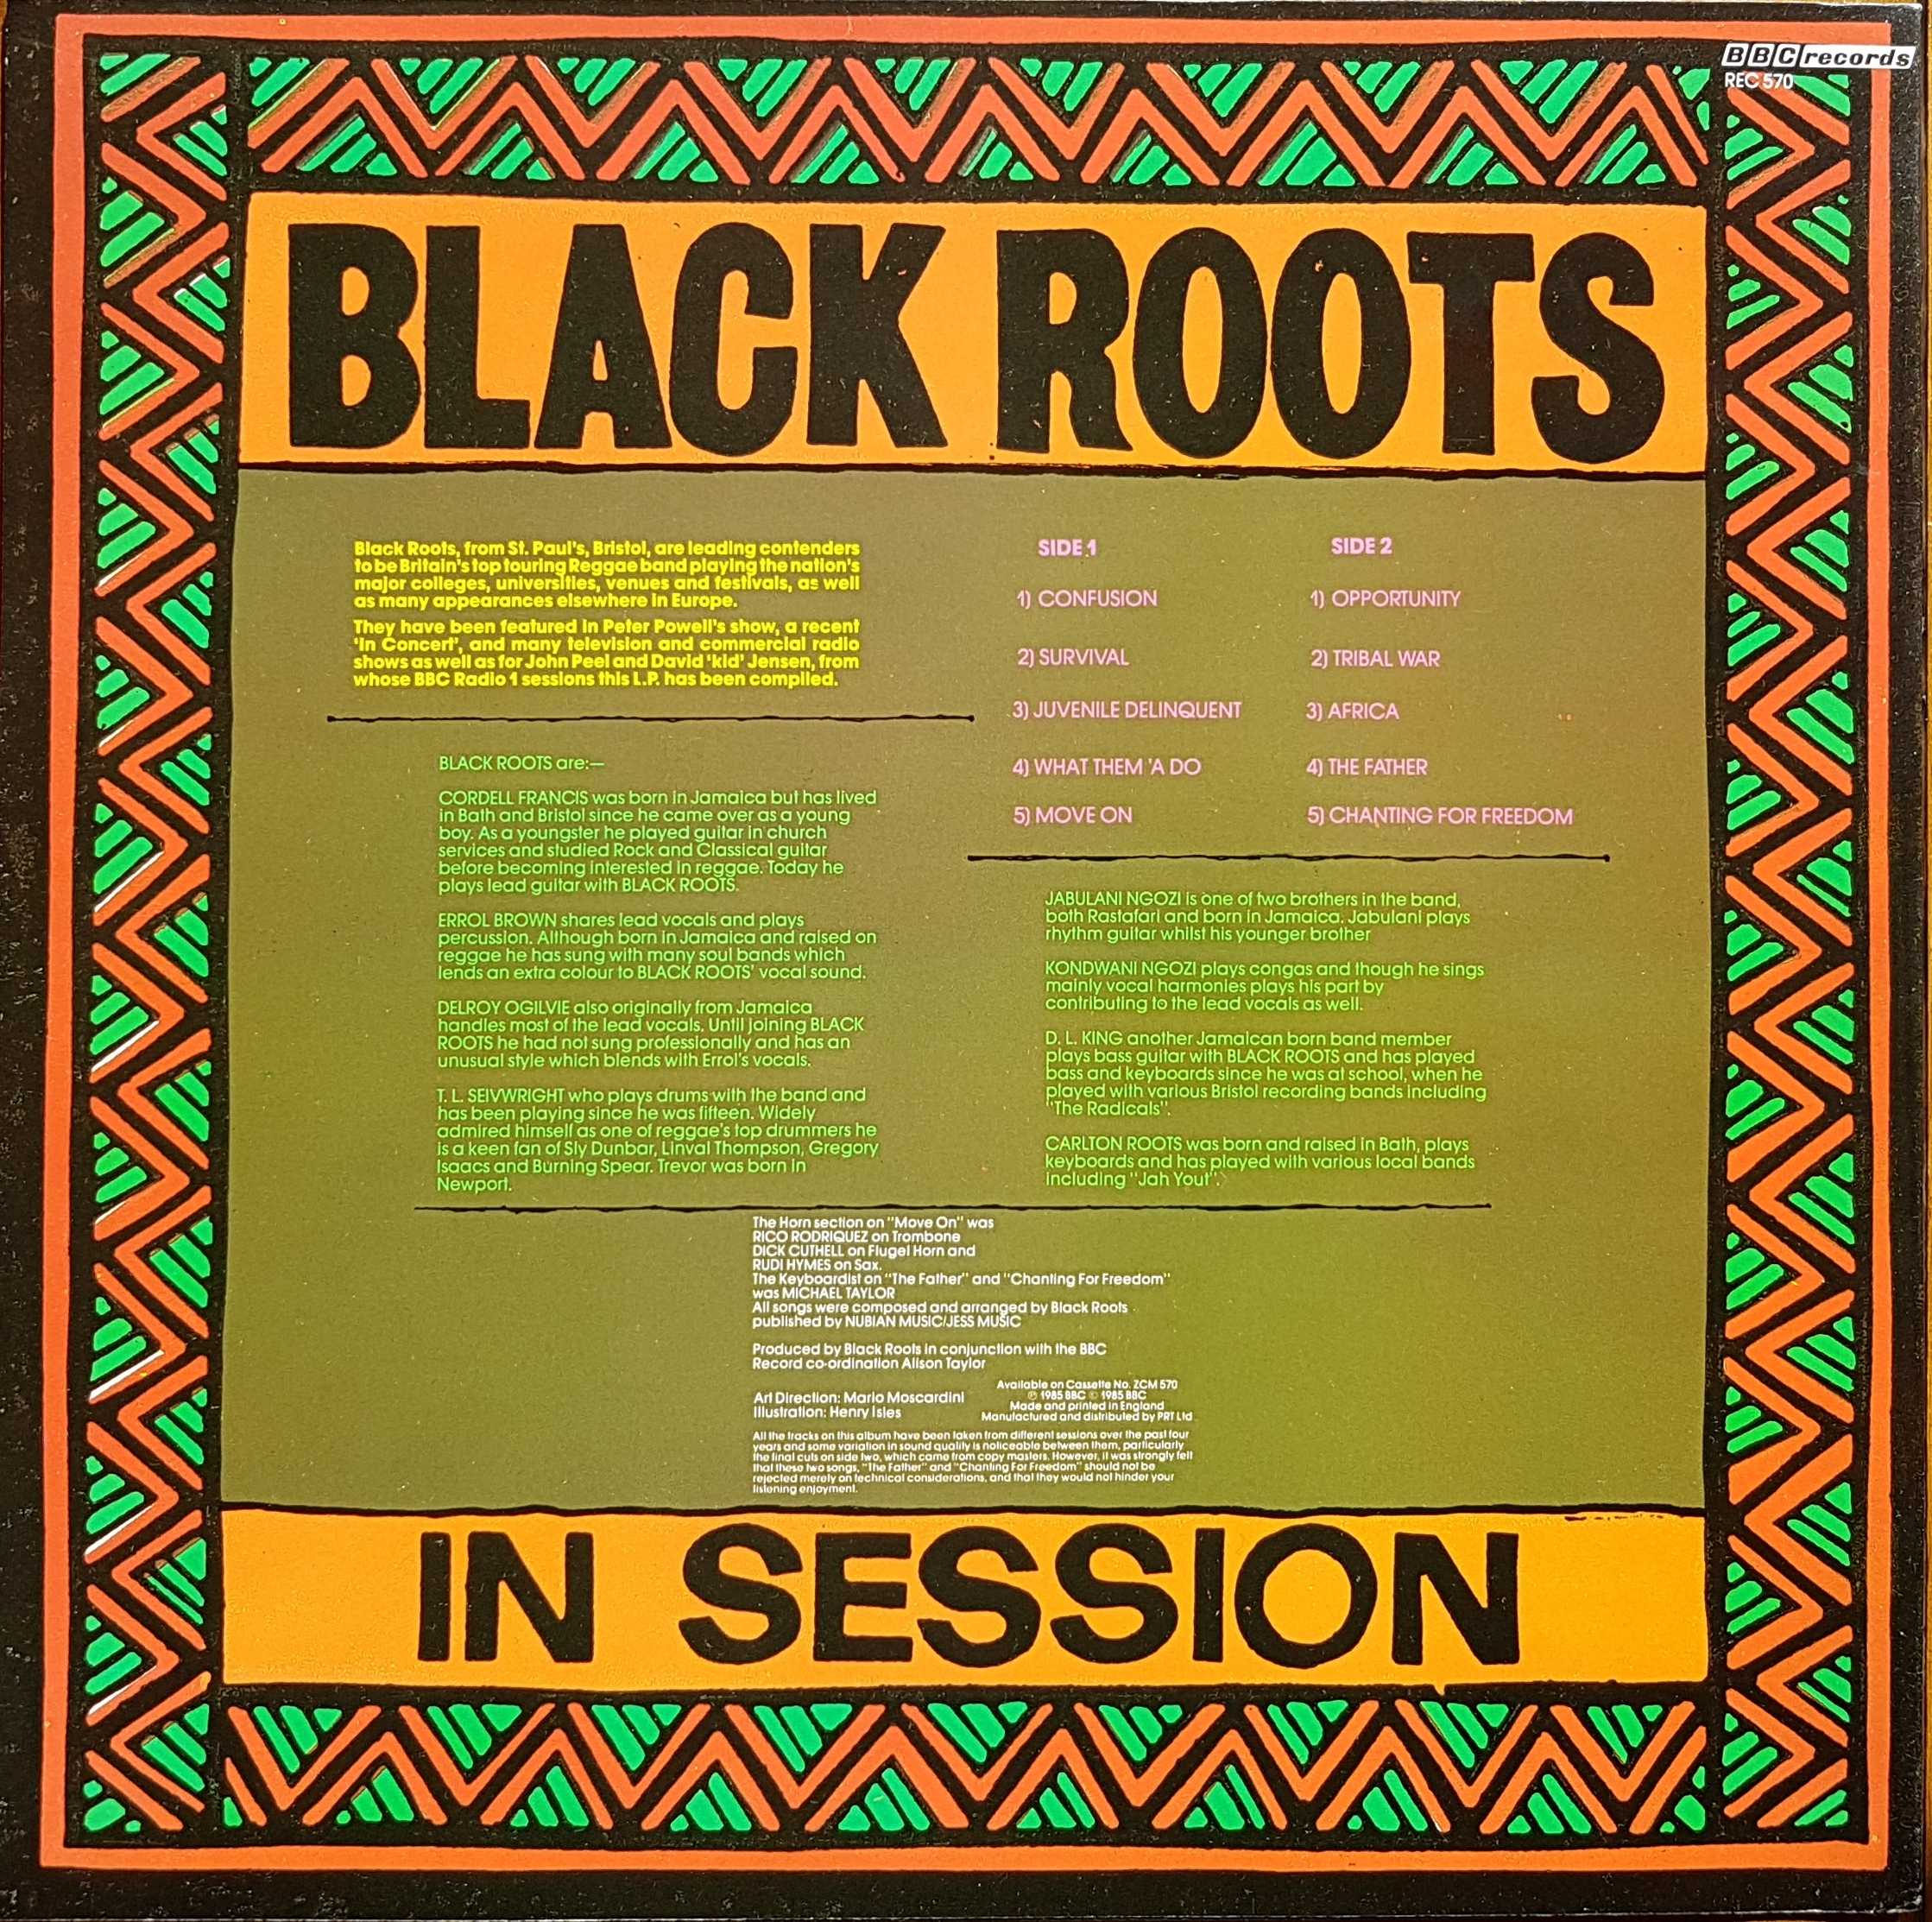 Picture of REC 570 In session by artist Black Roots from the BBC records and Tapes library